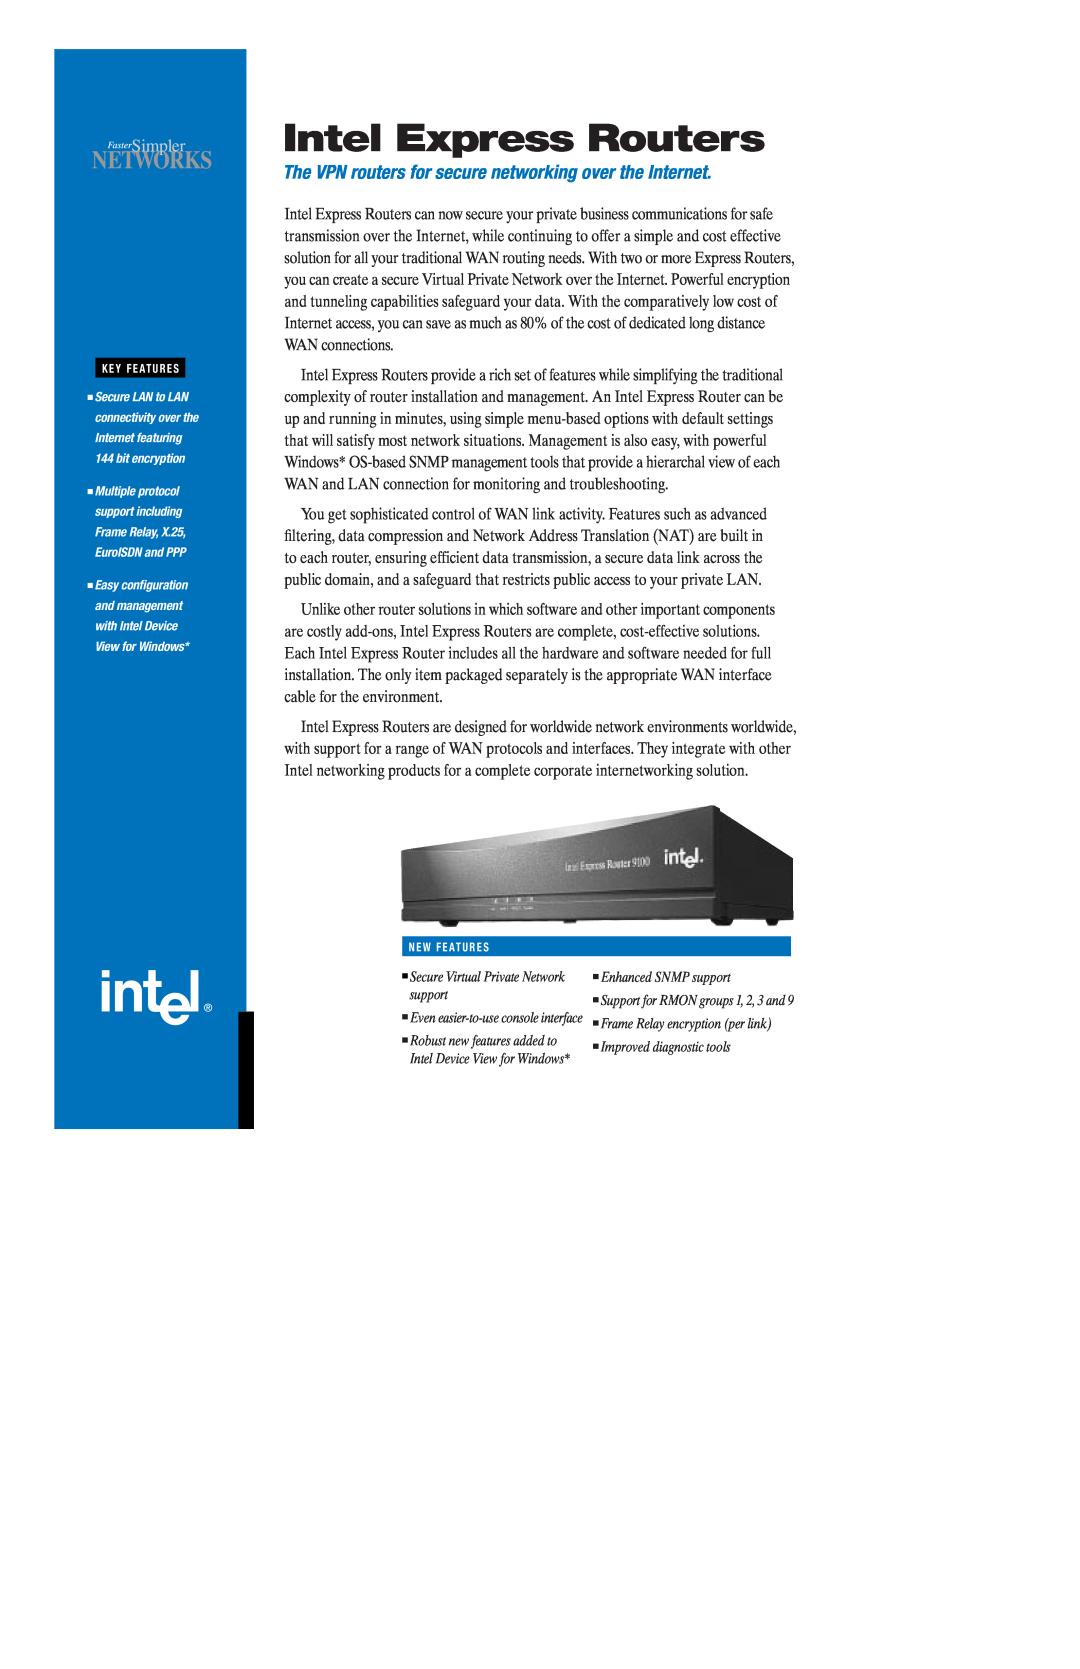 Intel 9000 manual Intel Express Routers, Secure Virtual Private Network support, Enhanced SNMP support 